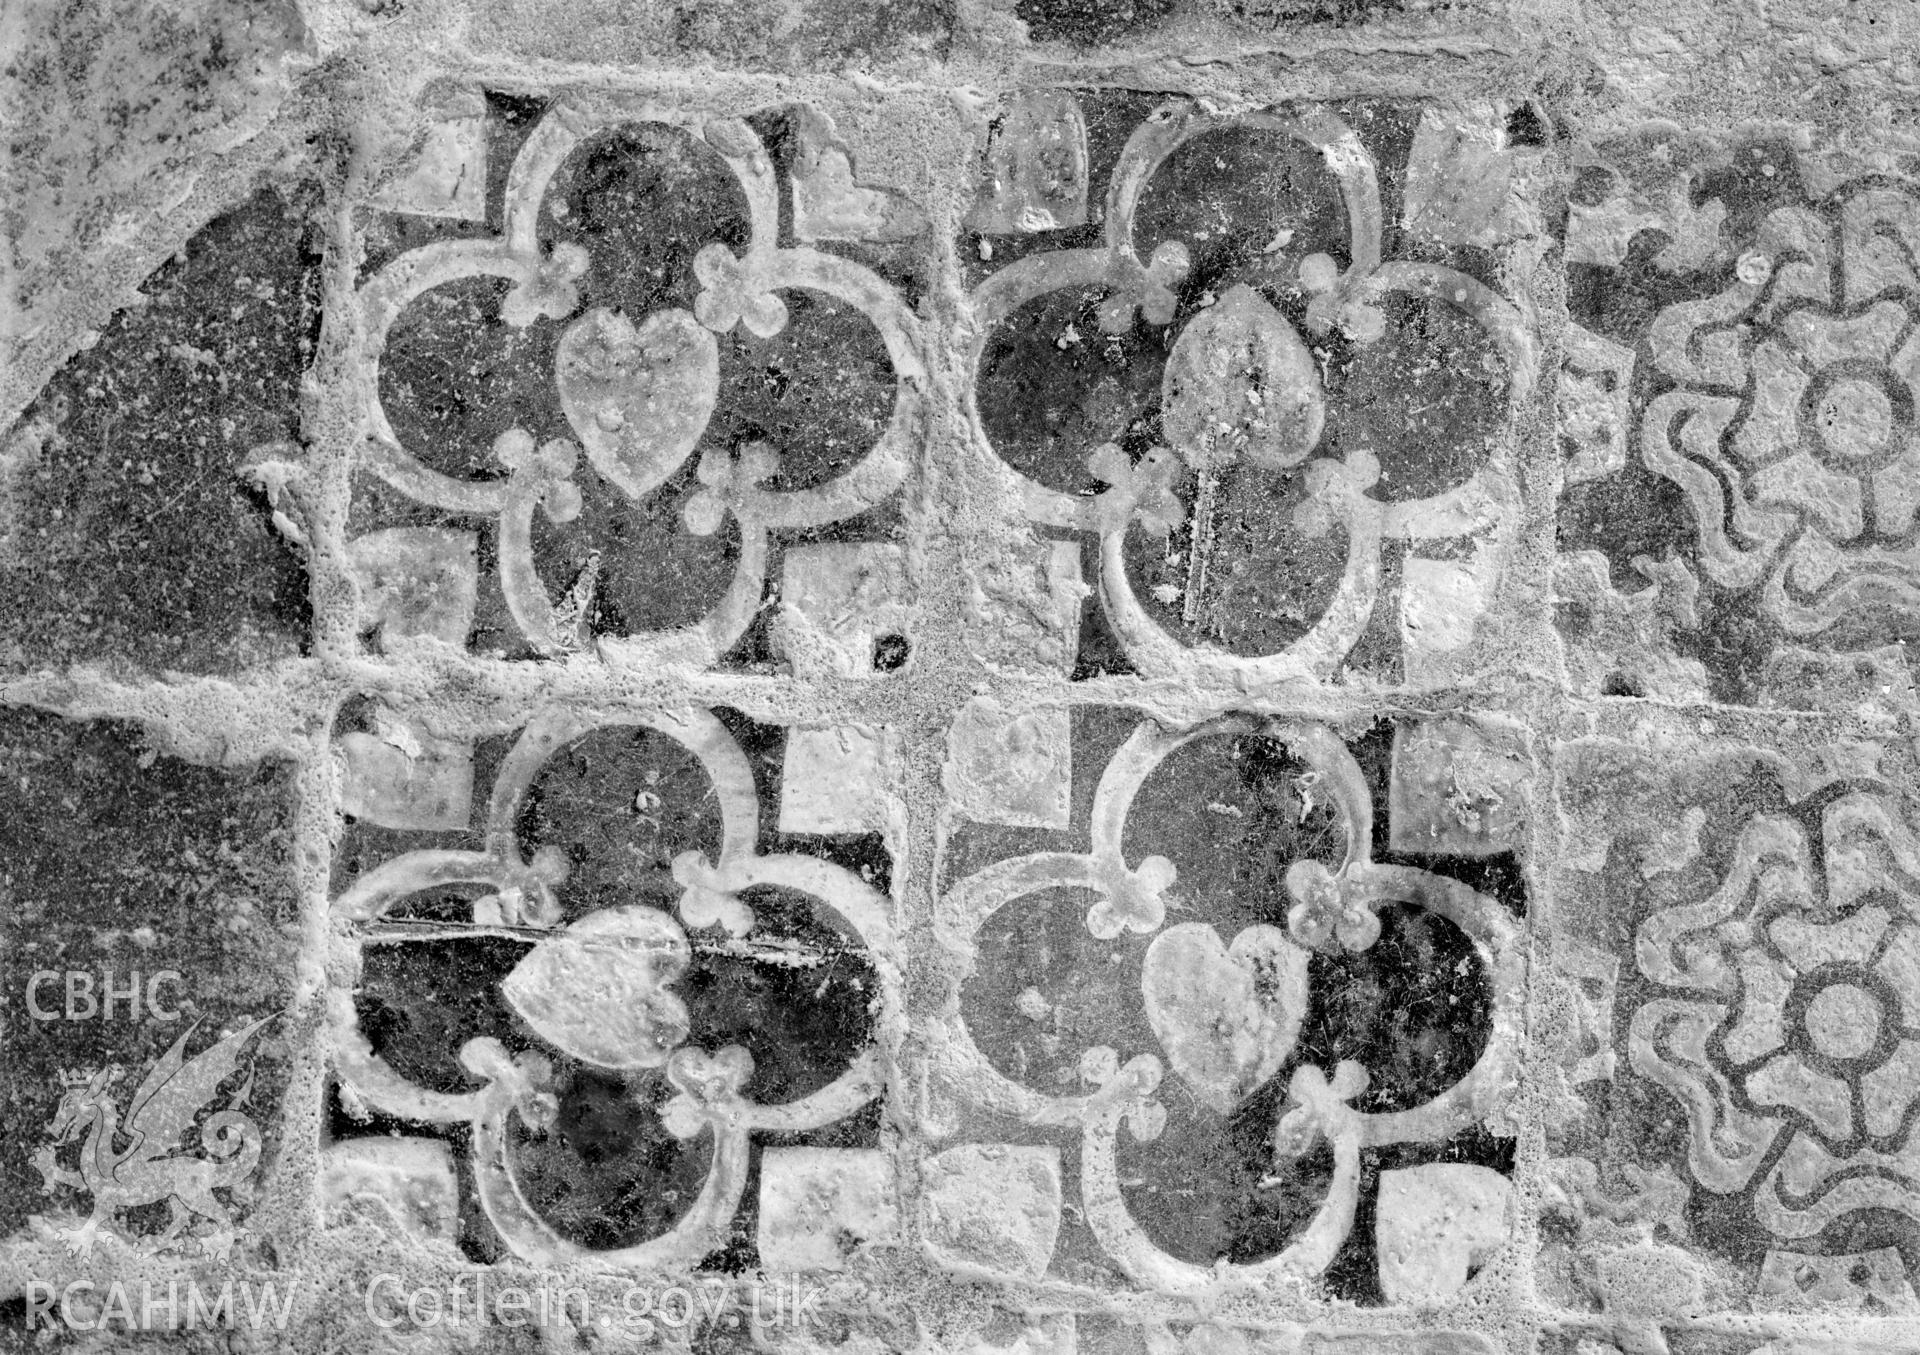 View of floor tile from St Davids Cathedral, taken by Clayton.